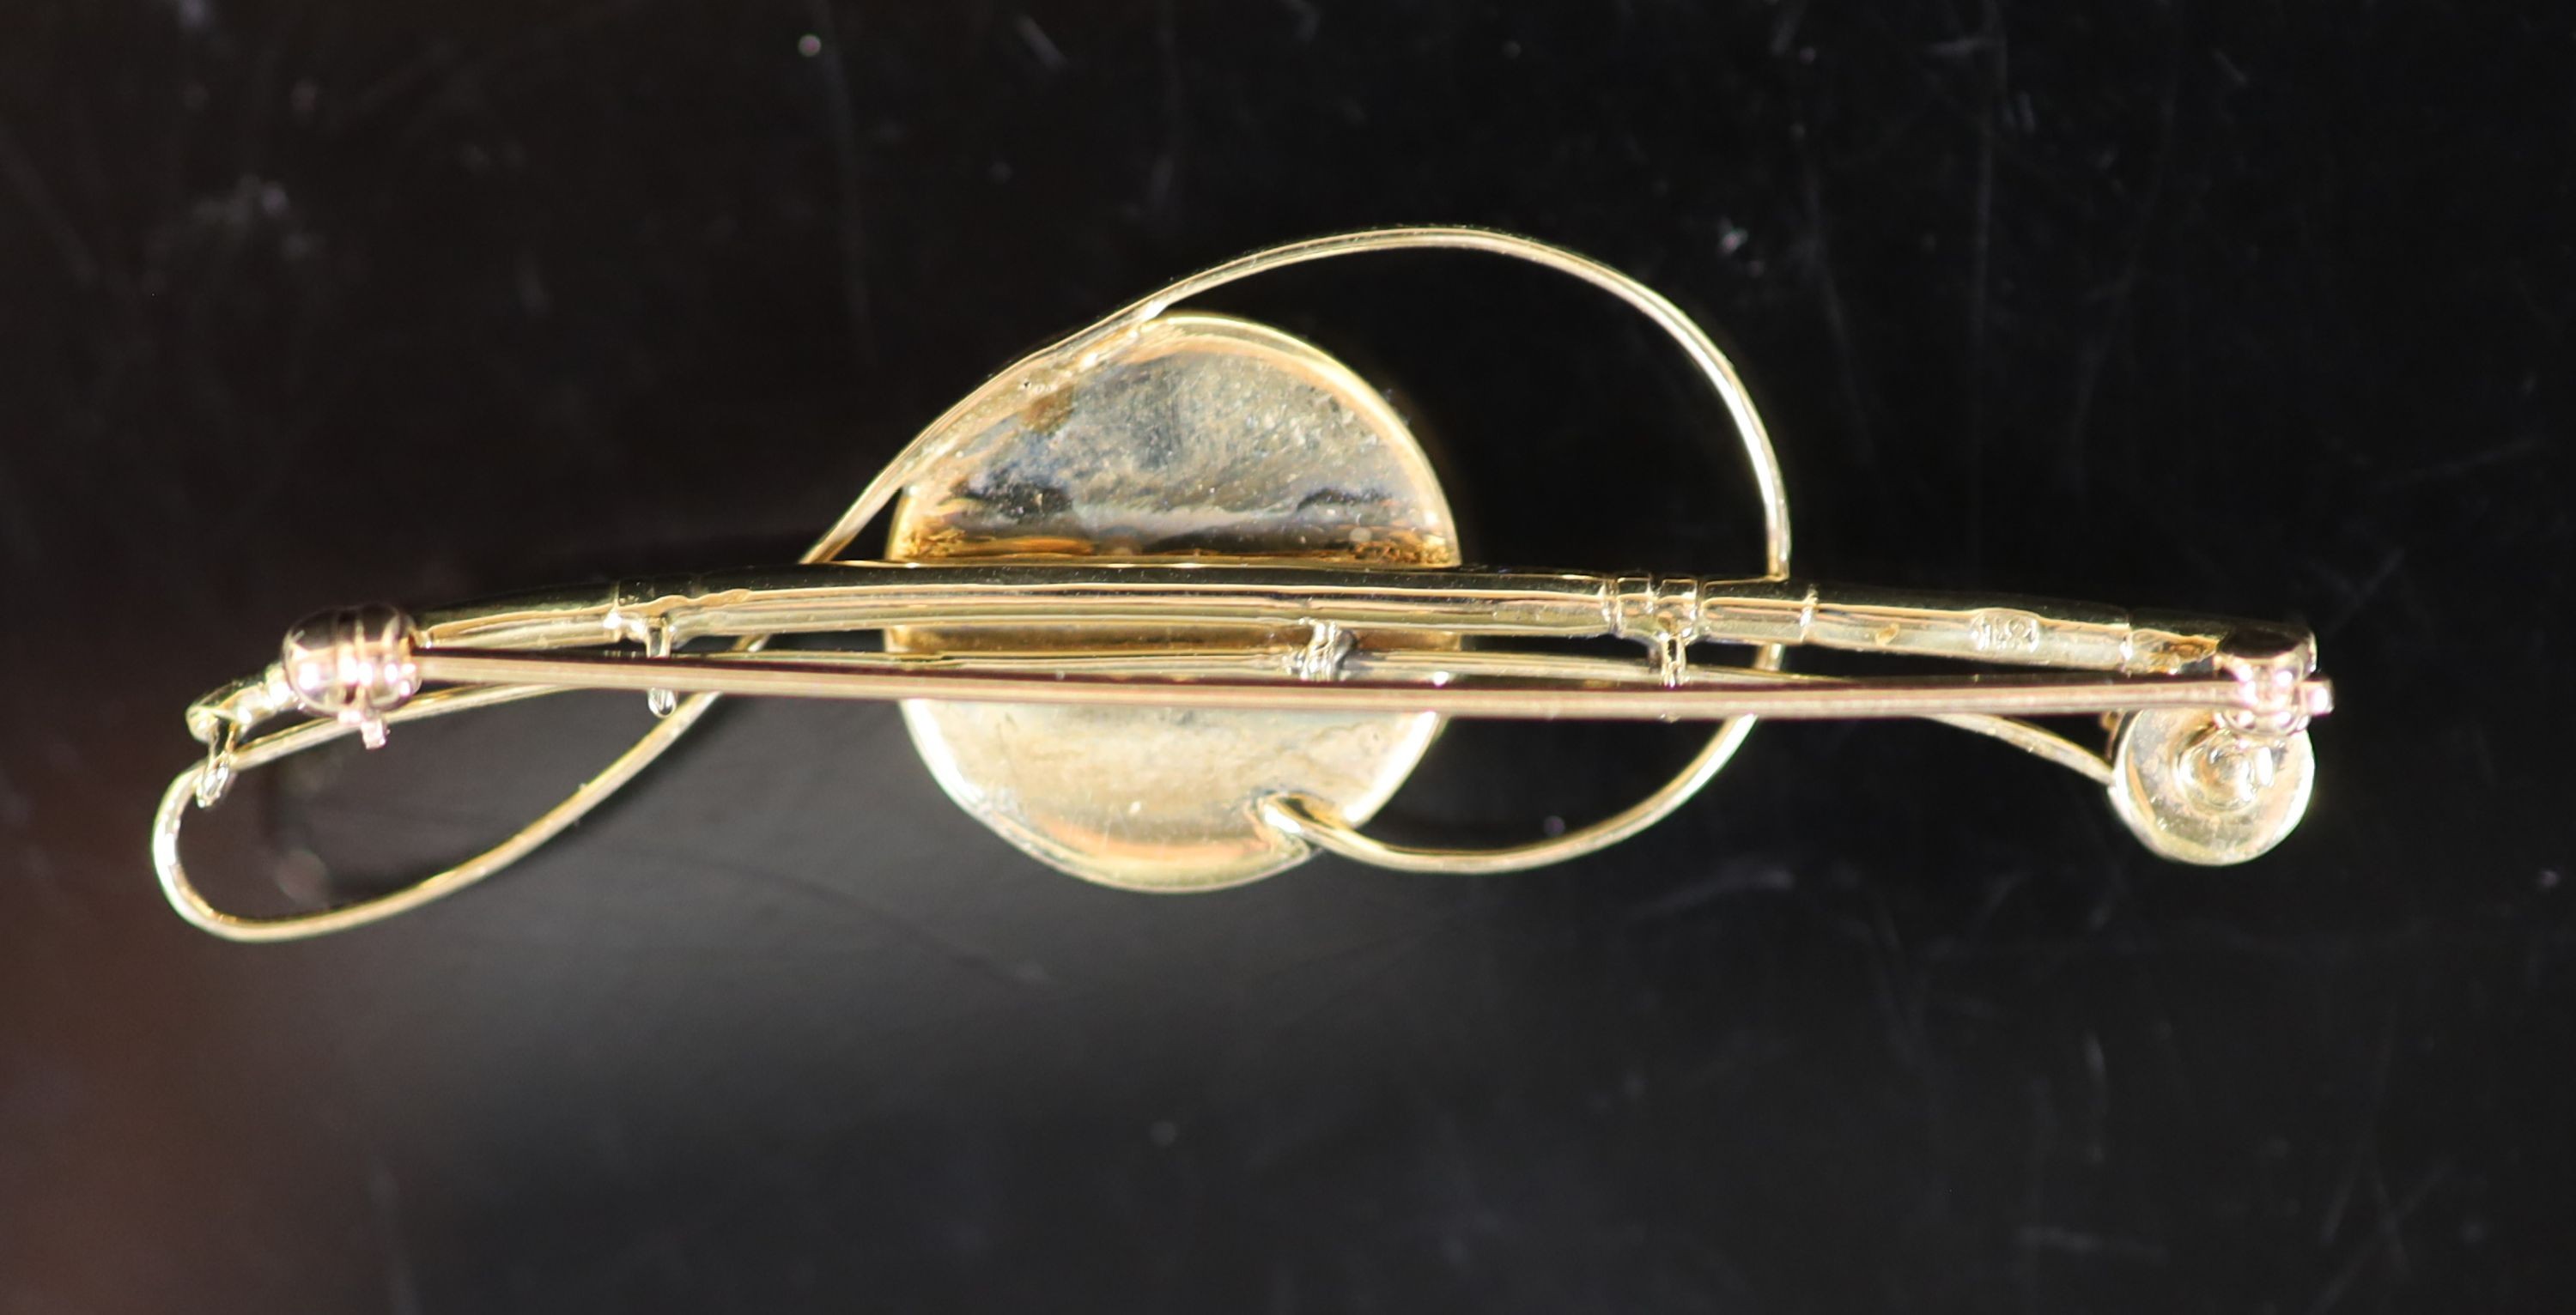 An Edwardian 18ct gold and Essex crystal set bar brooch, modelled as a fly fishing rod, with line and reel